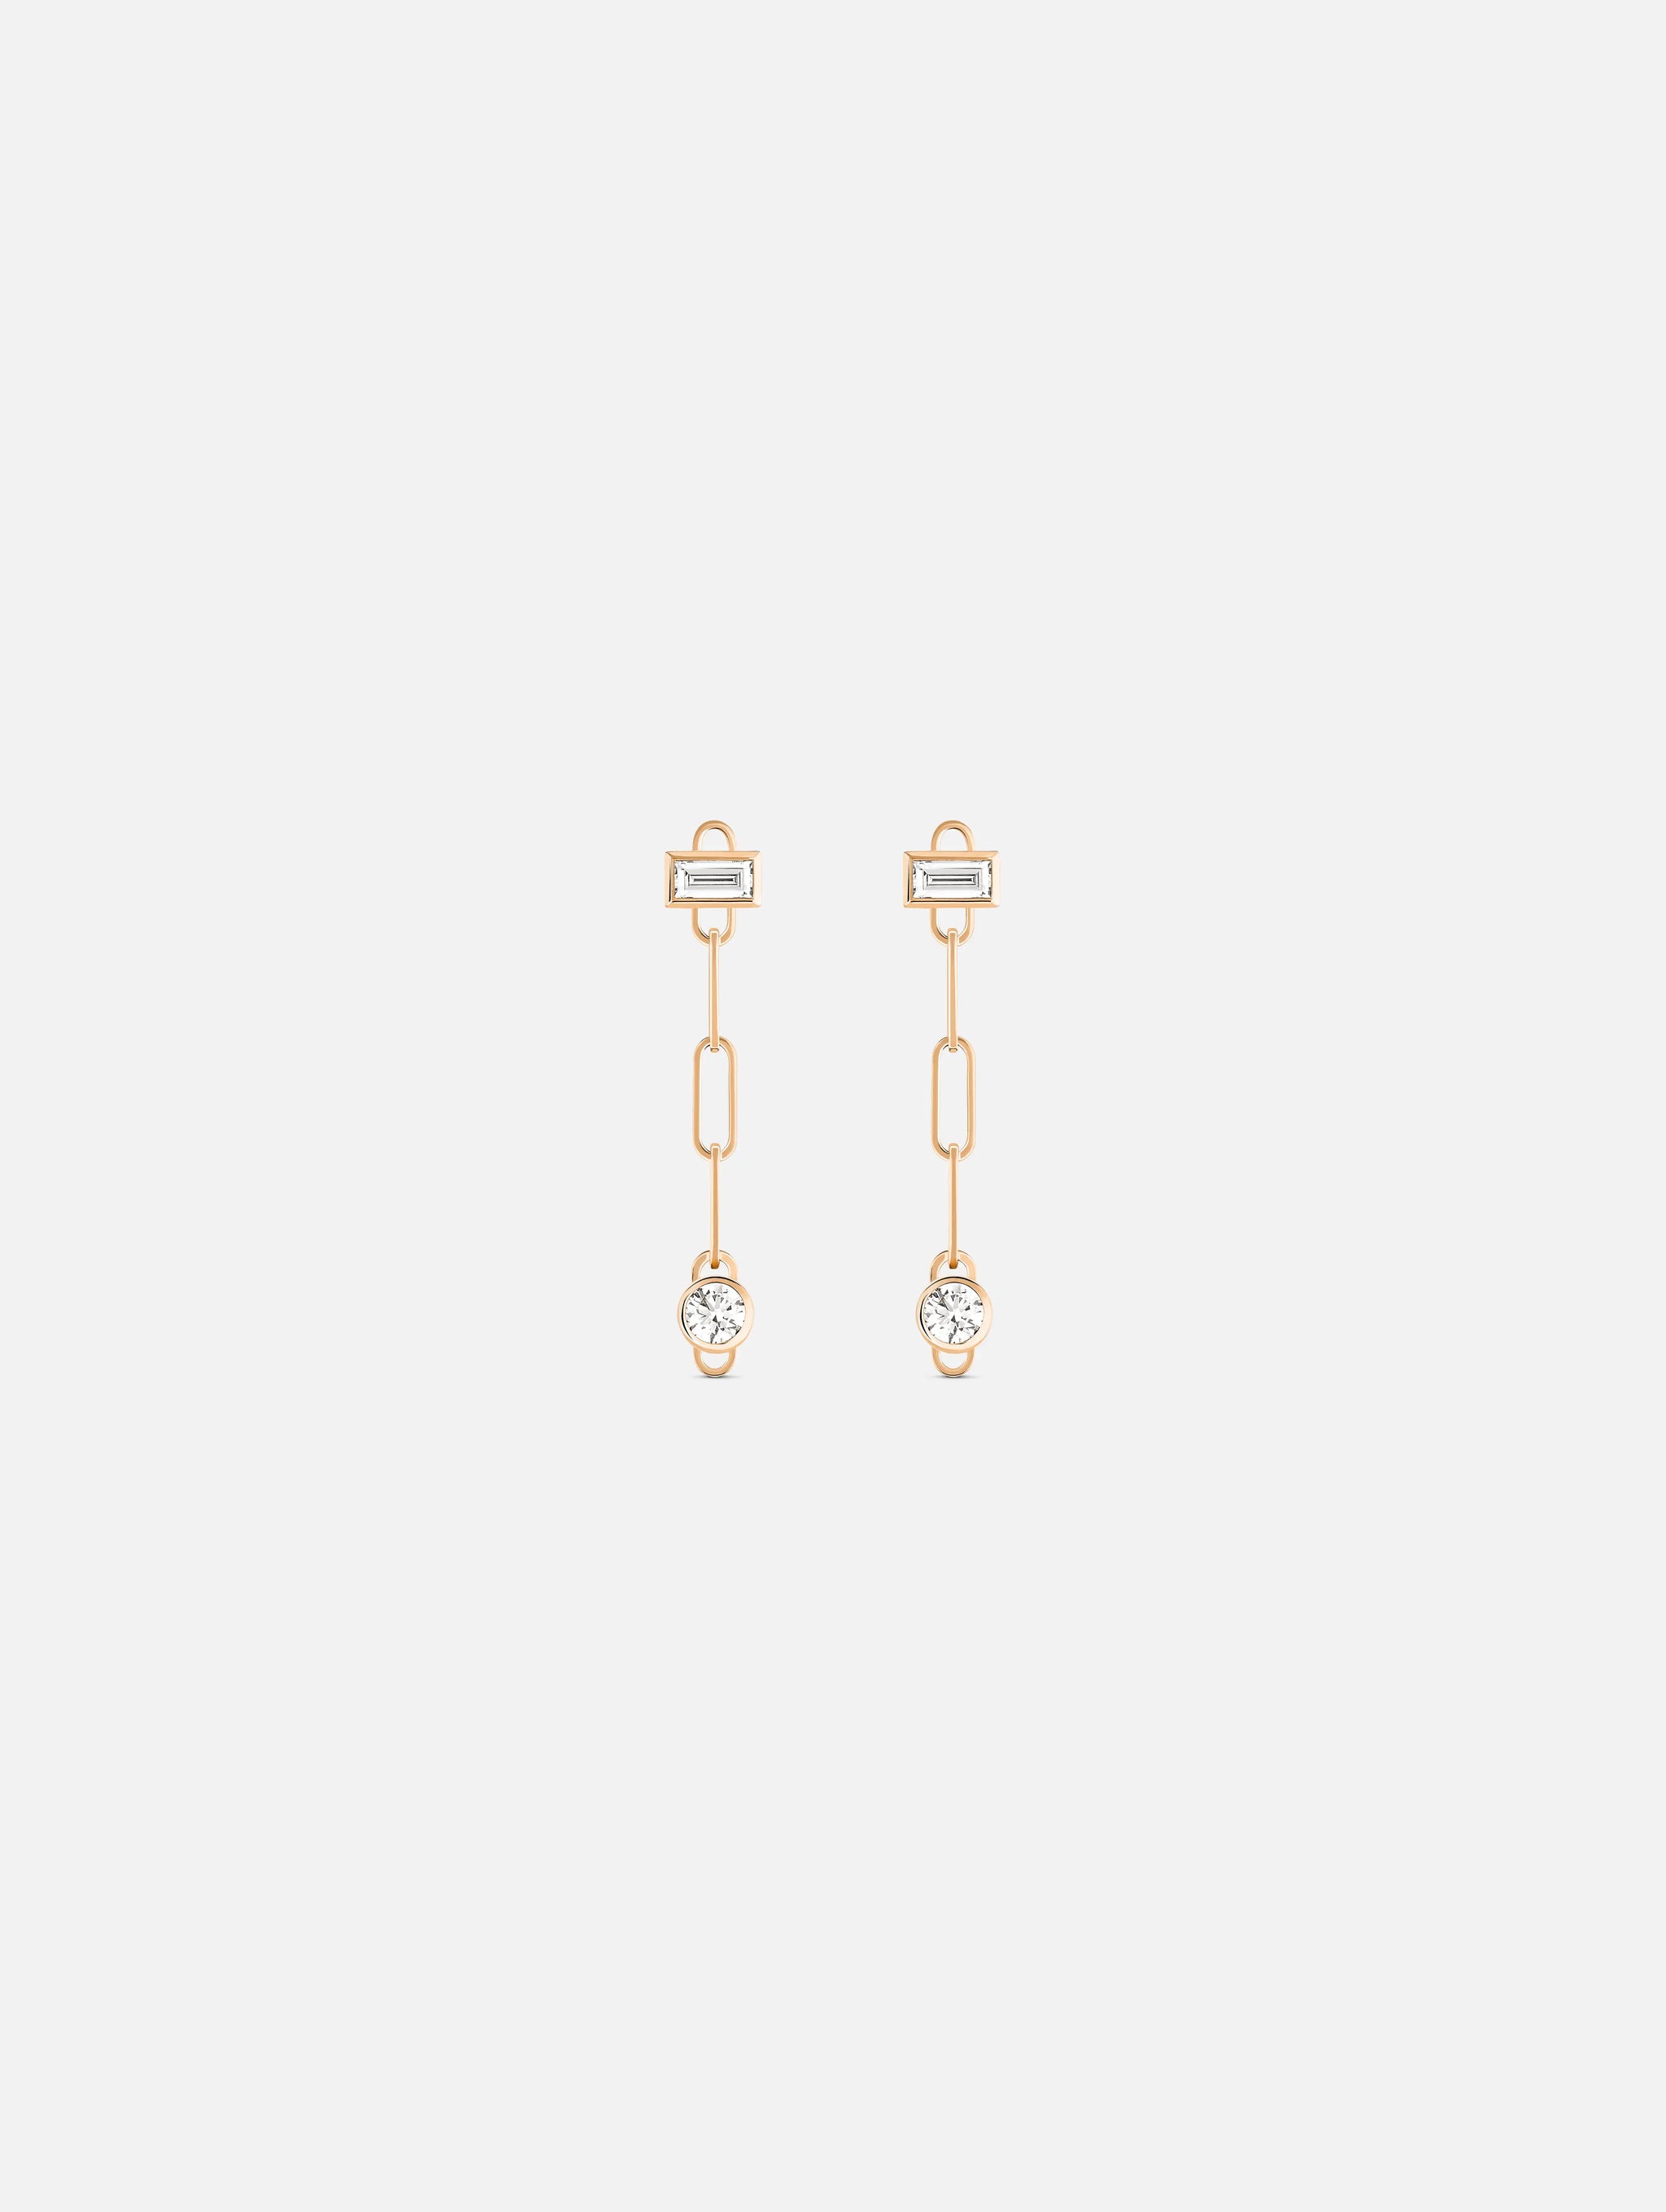 Baguette Round PM Classics Earrings in Rose Gold - 1 - Nouvel Heritage